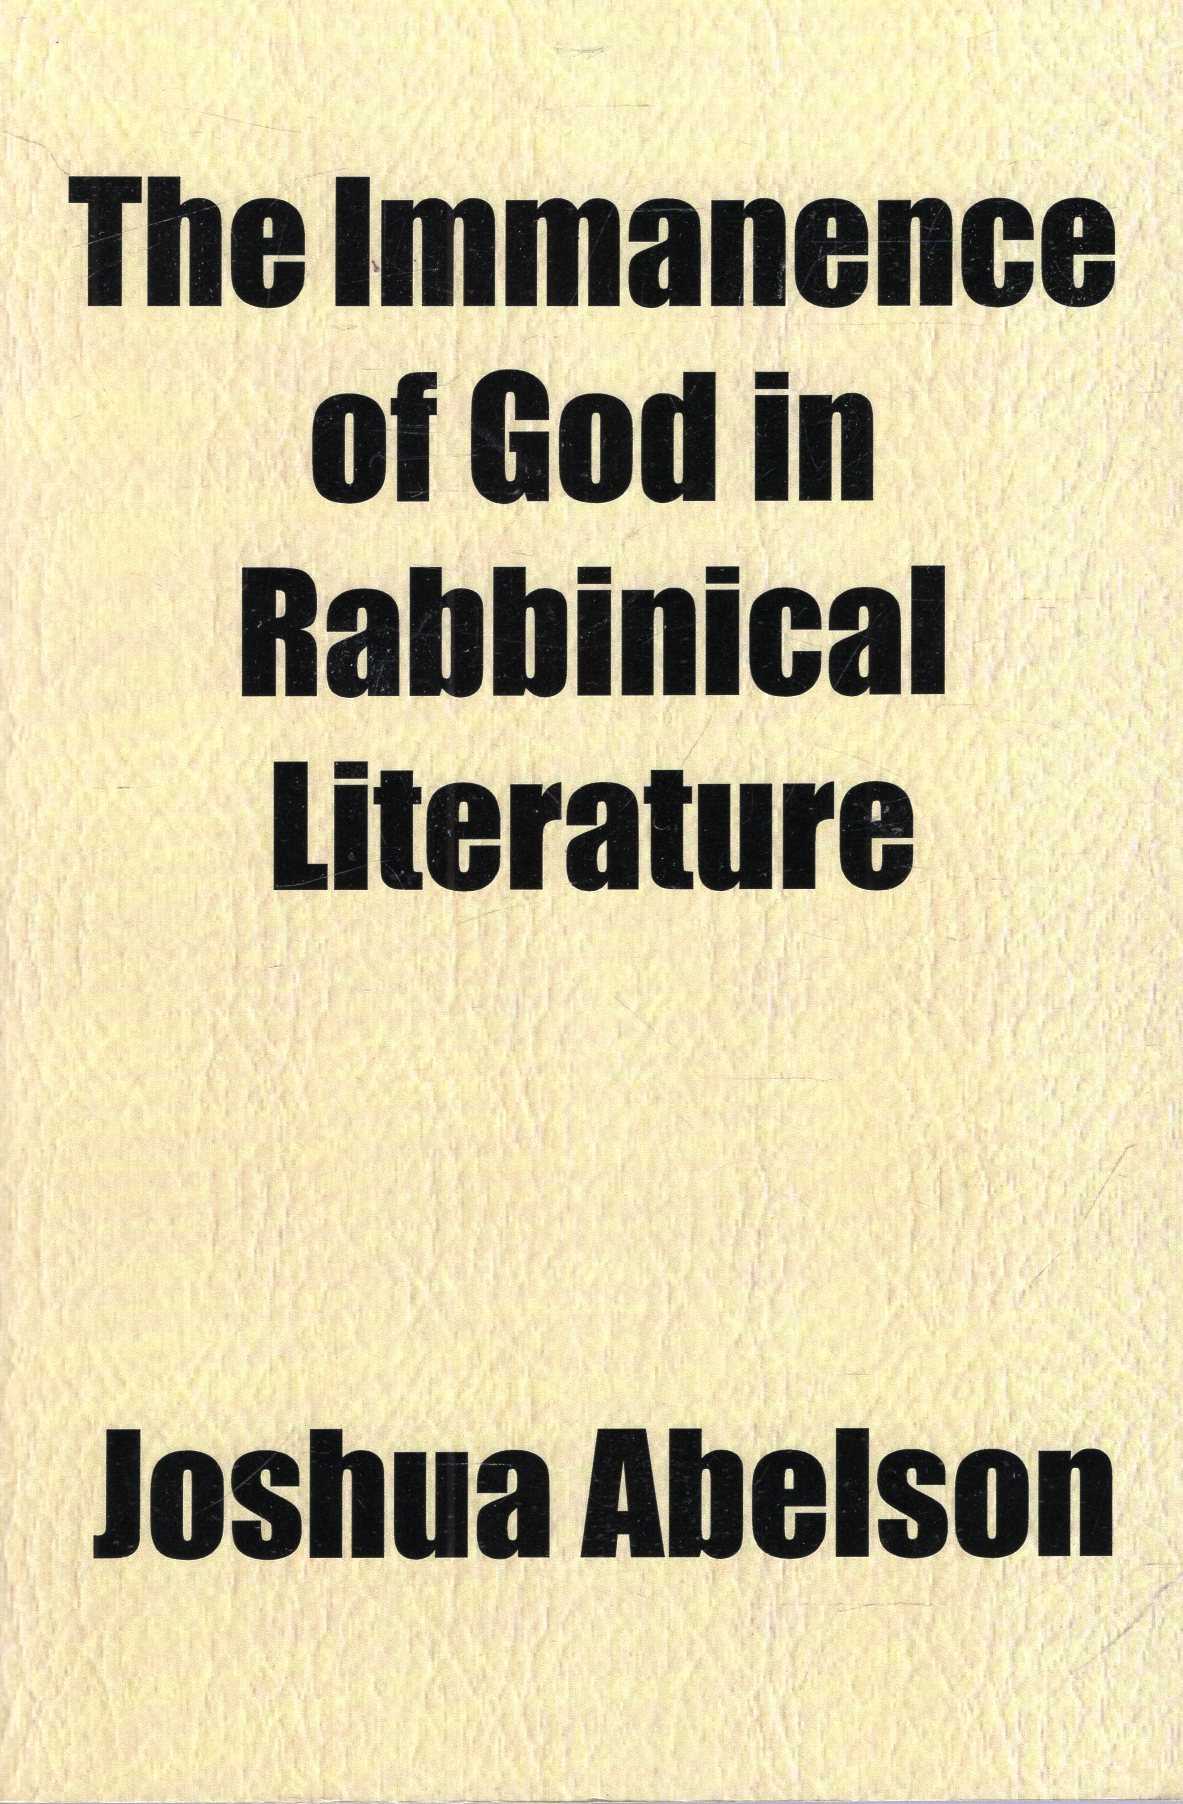 Image for The Immanence of God in Rabbinical Literature